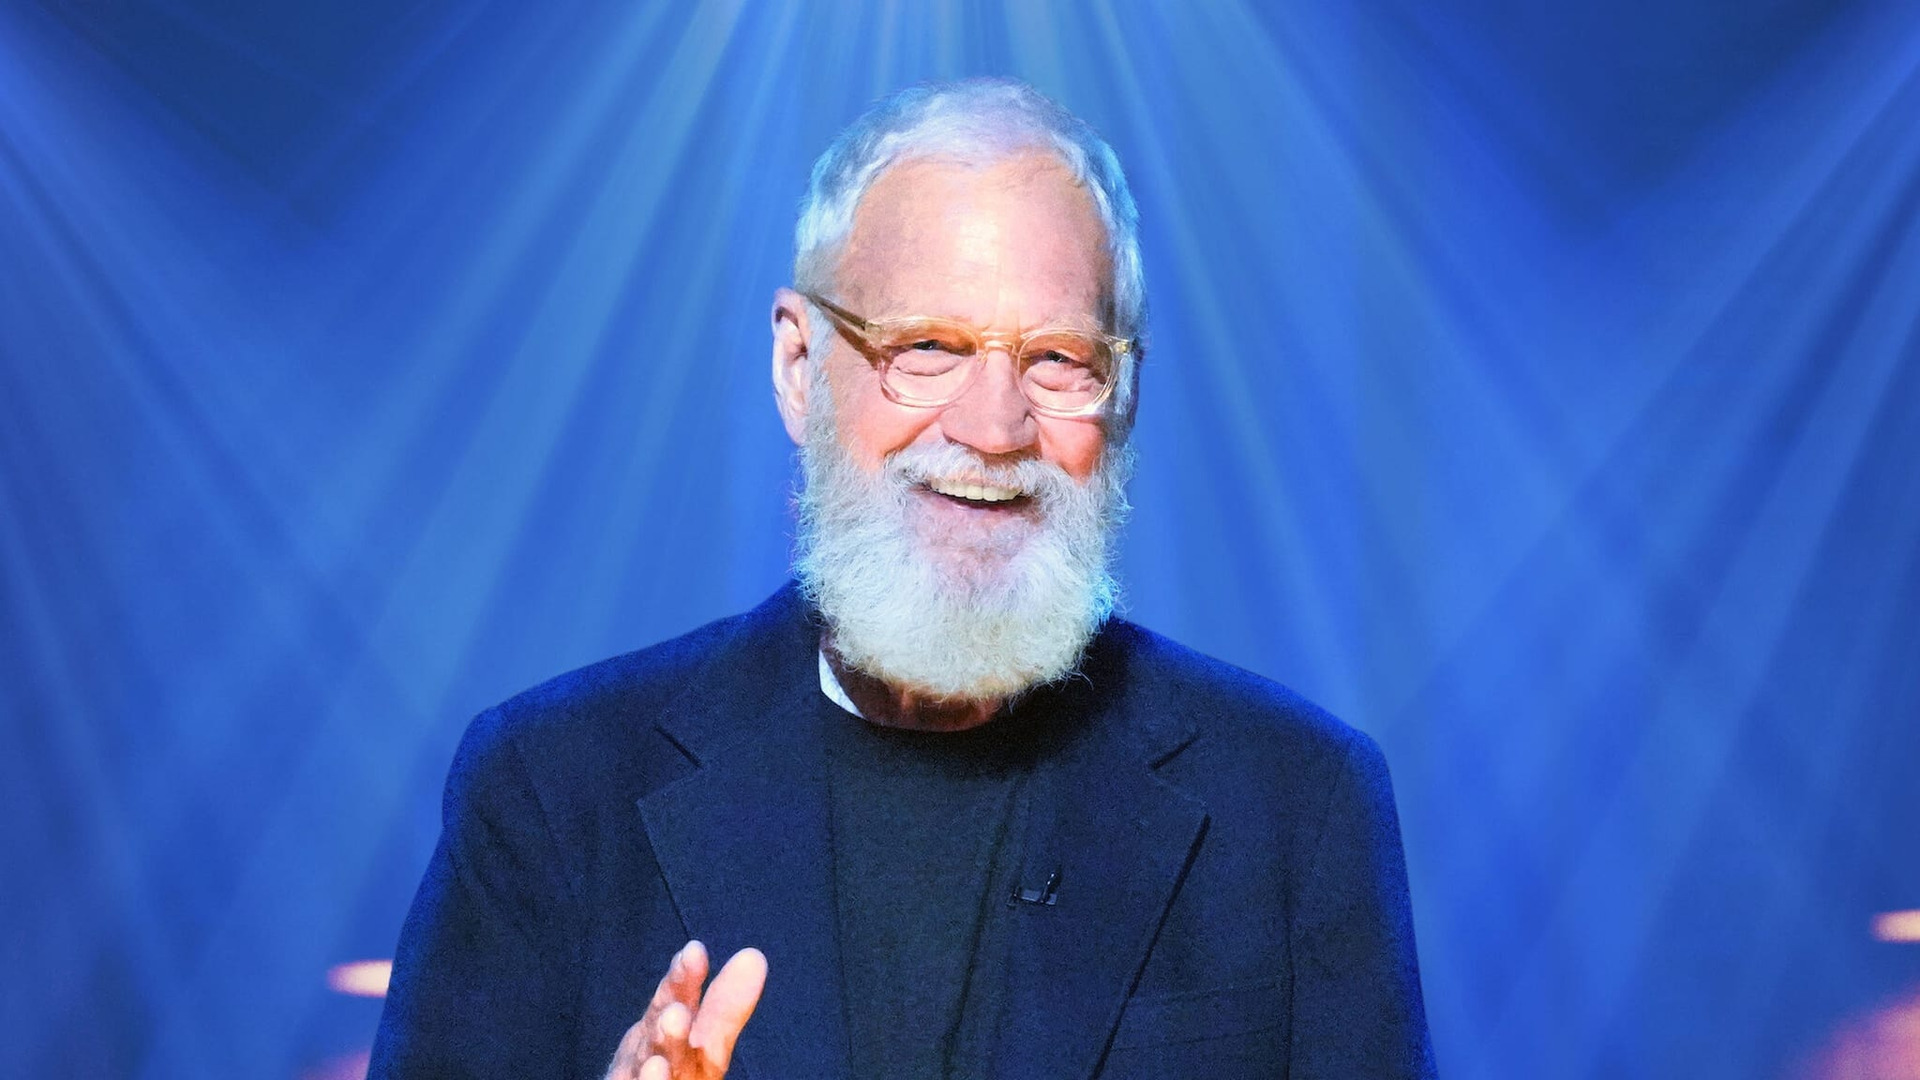 Show That's My Time with David Letterman